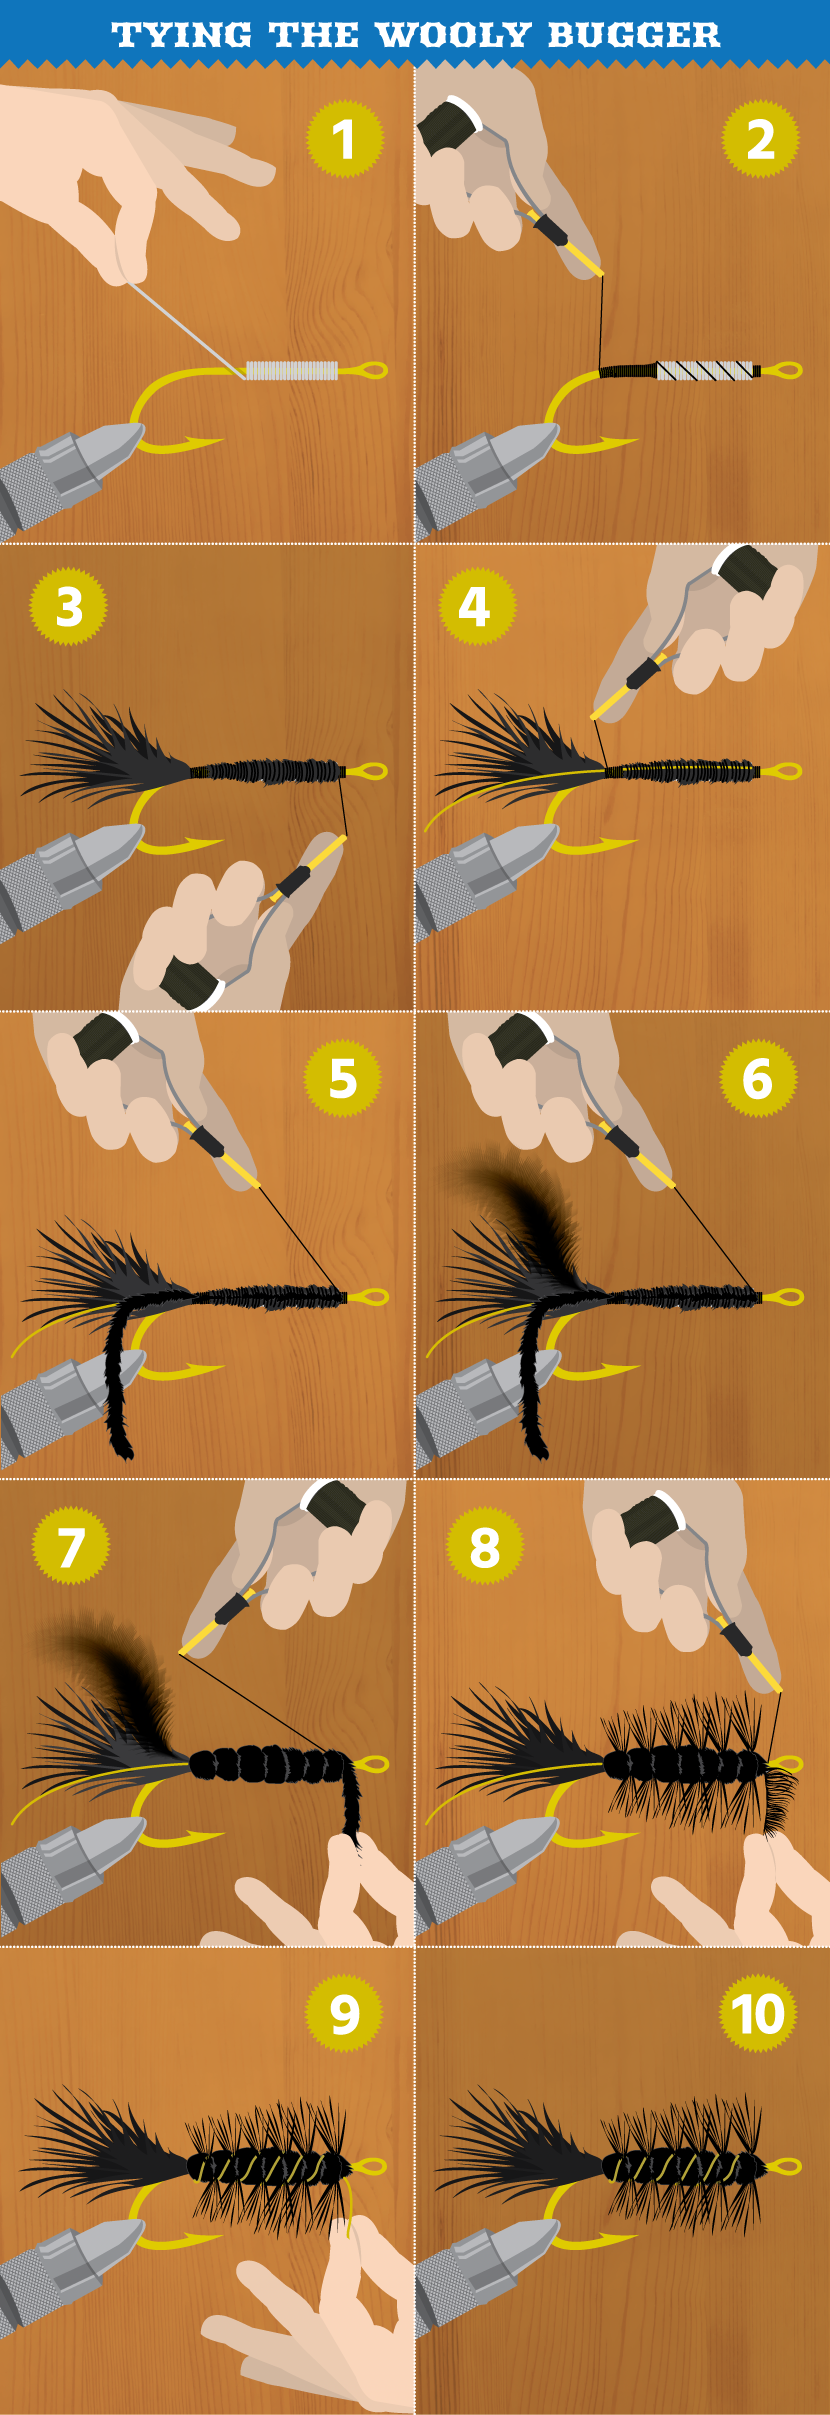 How to Tie a Wooly Bugger